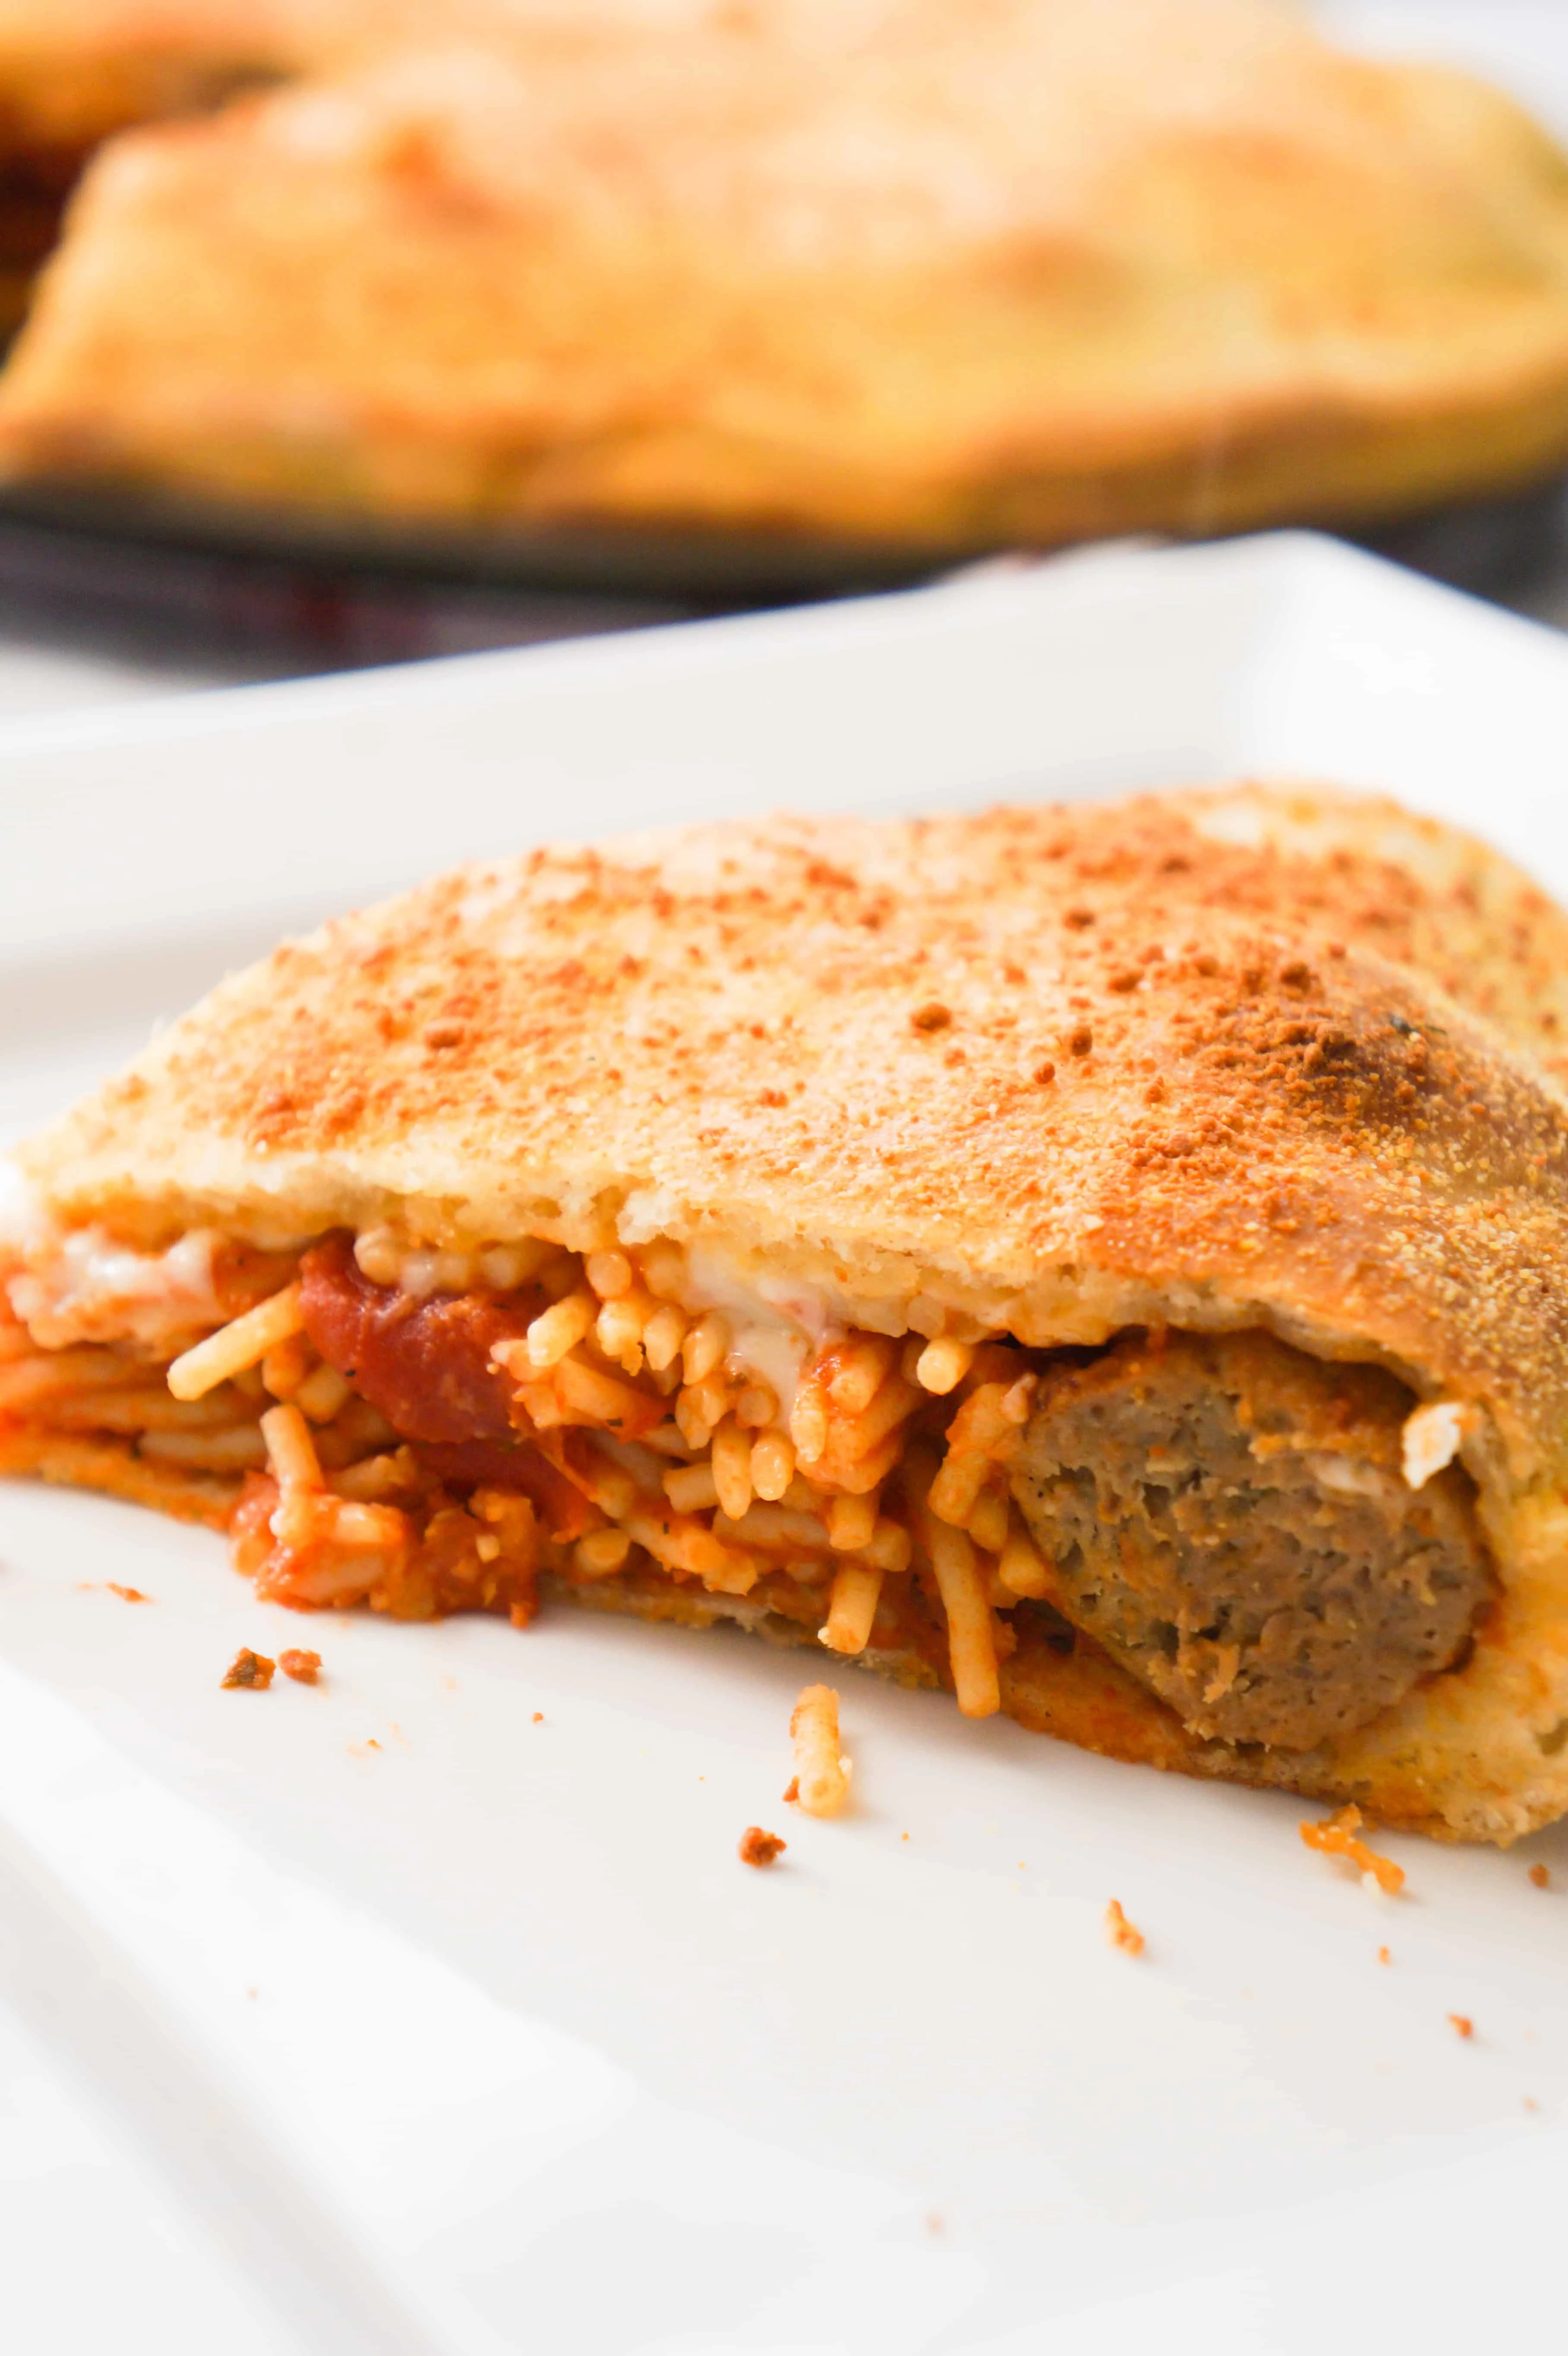 Plate with spaghetti and meatballs pizza slice